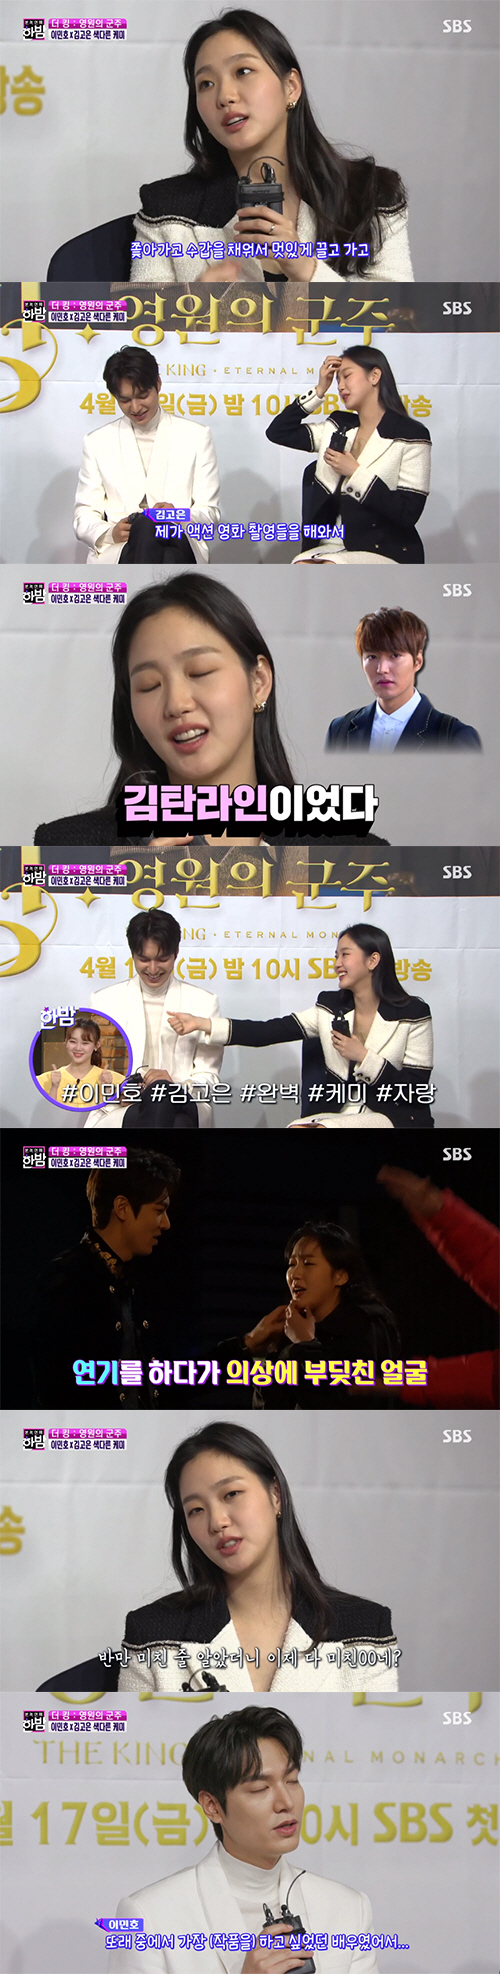 Actor Lee Min-ho expressed his affection for his opponent, Actor Kim Go-eun.On SBSs The Full Entertainment Midnight, which aired on Tuesday, she met actors Actor Lee Min-ho and Kim Go-eun, who starred in BSs new gilt drama The King: The Lord of Eternity (hereinafter referred to as The King).Lee Min-ho said, It is a romance, a melody, and a complex genre that goes to and from the World of Parallel.Lee Min-ho said, What did you learn for the character? He said, I practiced hard in coordination and riding. He added, The fact that the emperor is not really preparing.Lee Min-ho said, The foreseeable thing is to just admit it. Because I am the emperor himself, he laughed at the scene with his witty gesture.Also, Lee Min-ho revealed an extraordinary affection for her partner, the horse Maxi Iglesias, who said: Maxi Iglesias is really cute.When Im cold, my nose is red. I also eat my favorite candy. Lemon flavor. When I finished shooting, I ate one, one horse, like this.In fact, Lee Min-ho faced Maxi Iglesias and called him I have to remember my brother, while Maxi Iglesias was so good at following Lee Min-ho that he showed a sudden action approaching him who was filming.The Detective of Korea, which I met with parallel World, is a static played by Kim Go-eun.When asked about his first role in Detective, Kim Go-eun left a unique impression that it was very good to handcuff someone.Kim Go-eun said, I have been in charge of the role of being chased, but I am handcuffed and dragged nicely.Kim Go-eun turned into a wonderful Detective that overpowered the suspect in The King.The King is a new work of Kim Eun-sook writer who believes and sees it.In addition, Lee Min-ho was loved by heirs and Kim Go-eun was loved by Kim Eun-sooks works in Dokkaebi, so the expectation of viewers was added.Lee Min-ho said of Kim Go-eun, I thought it was a really attractive actor, and in fact it was the most wanted actor of my age.Kim Go-eun also replied, It was so good, revealing that he was the Kimtan line played by Lee Min-ho in The Heirs.Lee Min-ho also said, Do you have an impact ambassador in this work? Kim Go-eun said, I will welcome Jeong Tae as the empress to be born. Kim Go-eun said, I thought half crazy.